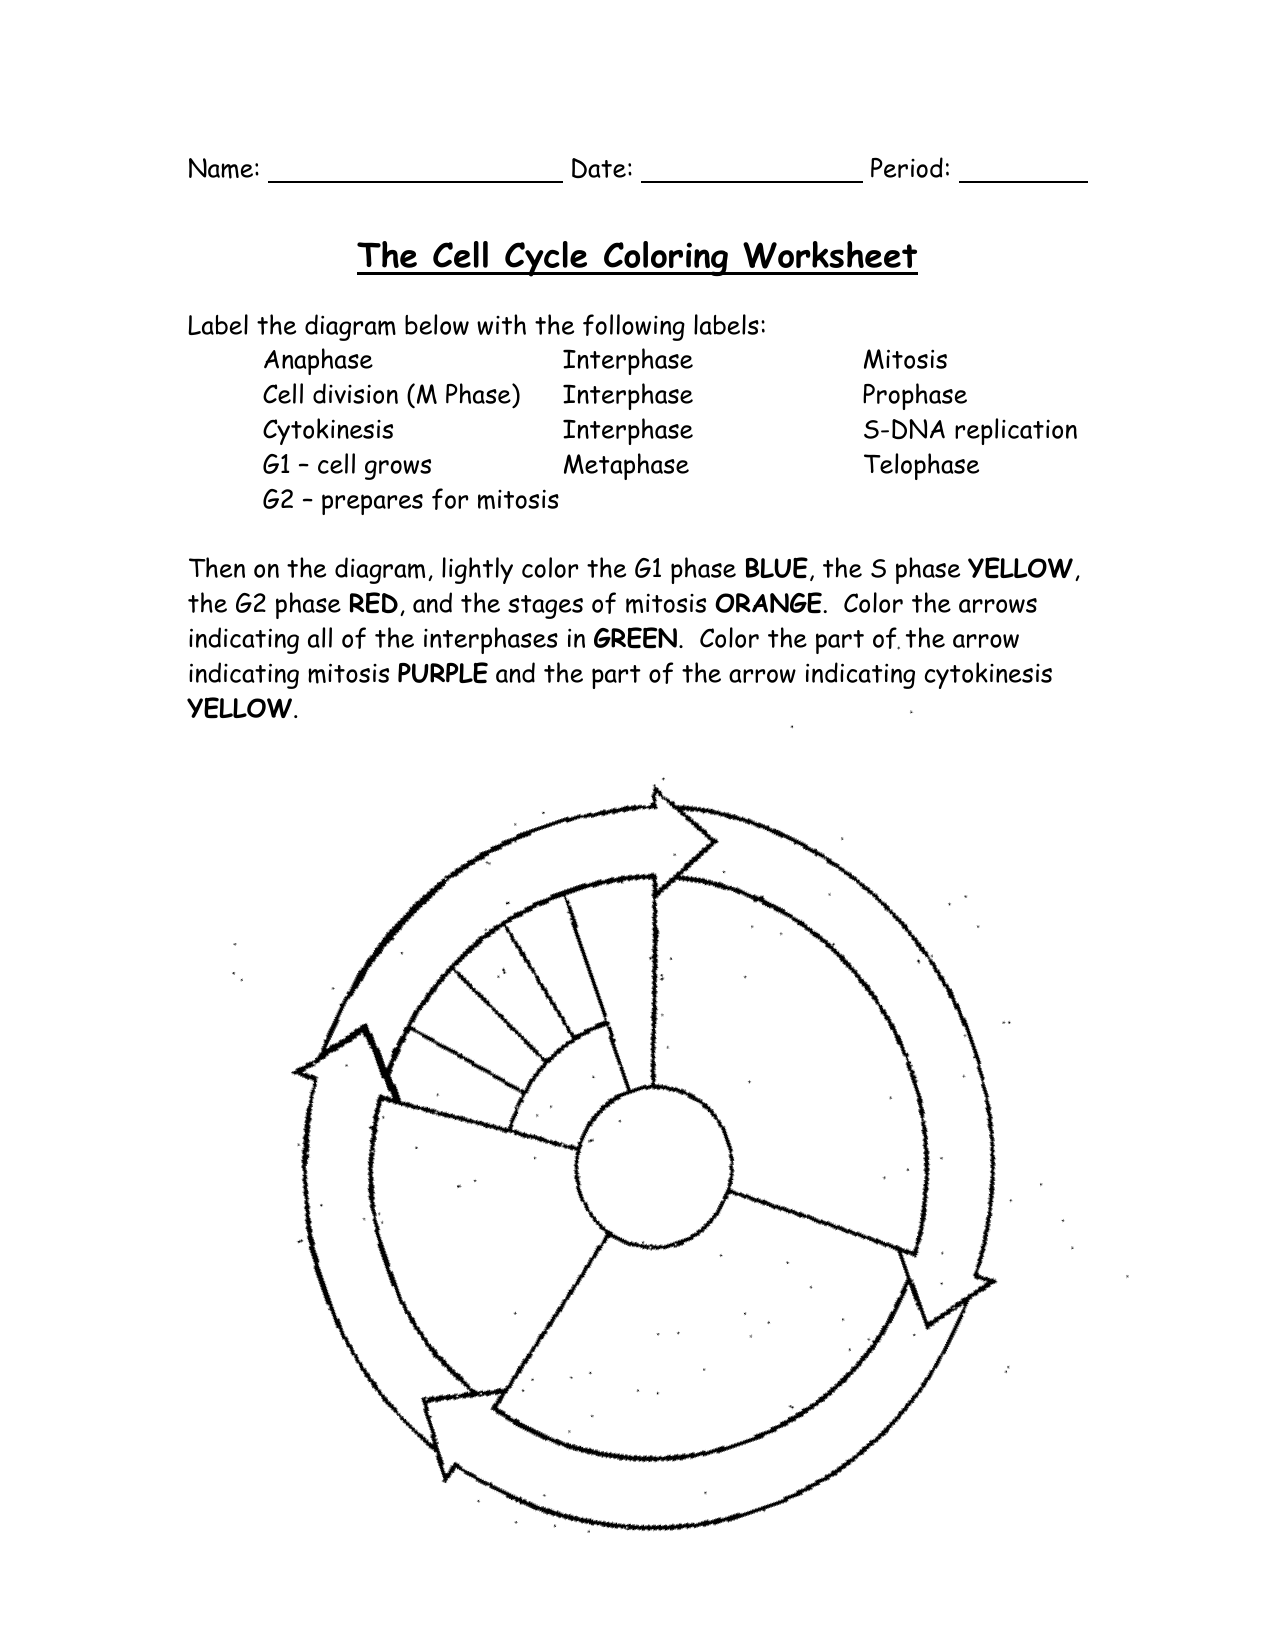 Cell Cycle Coloring Worksheet Within Cell Cycle Coloring Worksheet